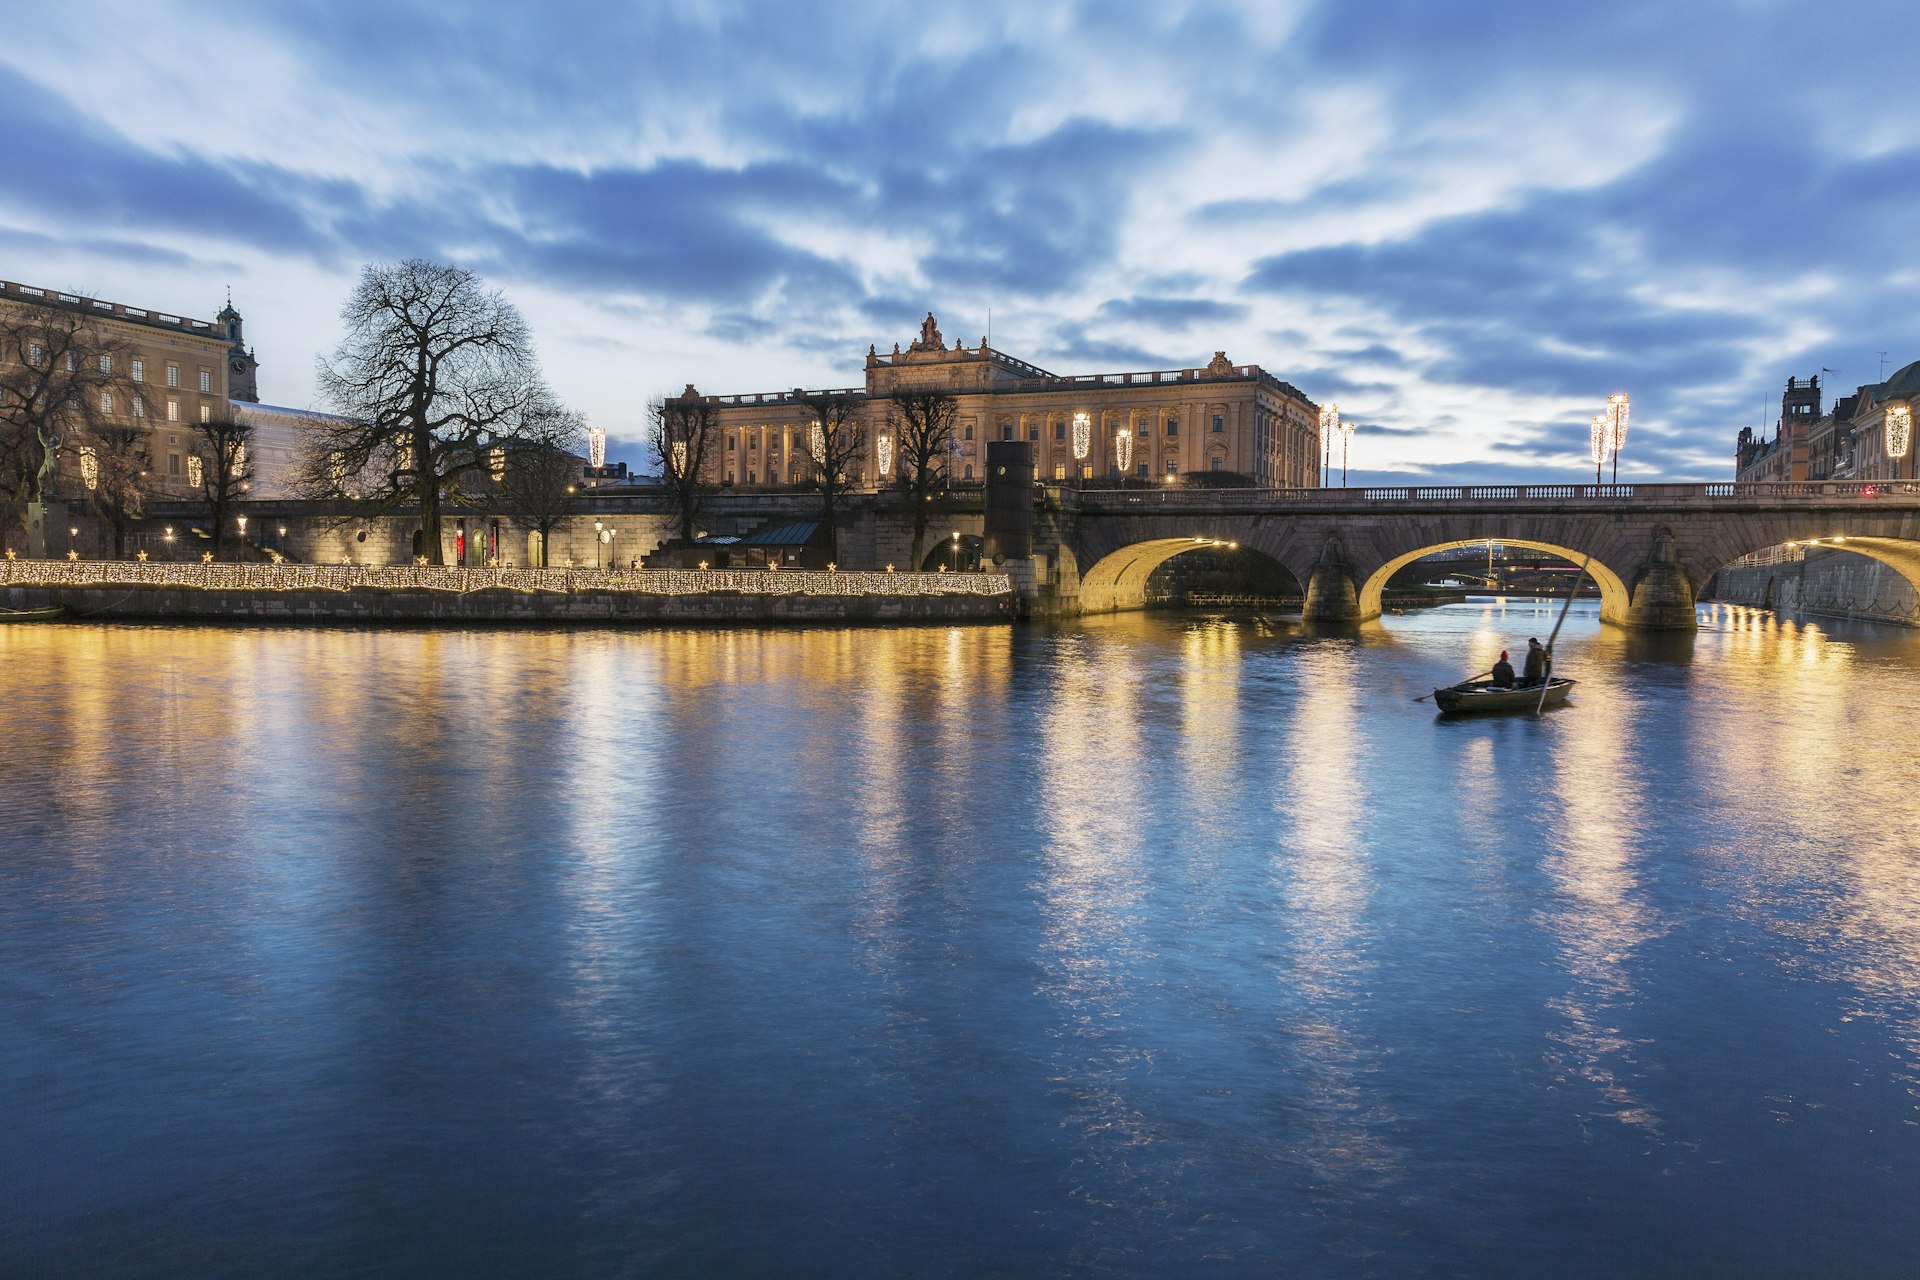 A rowboat paddles near the Norrbro Bridge in the evening with the Stockholm Palace in the background